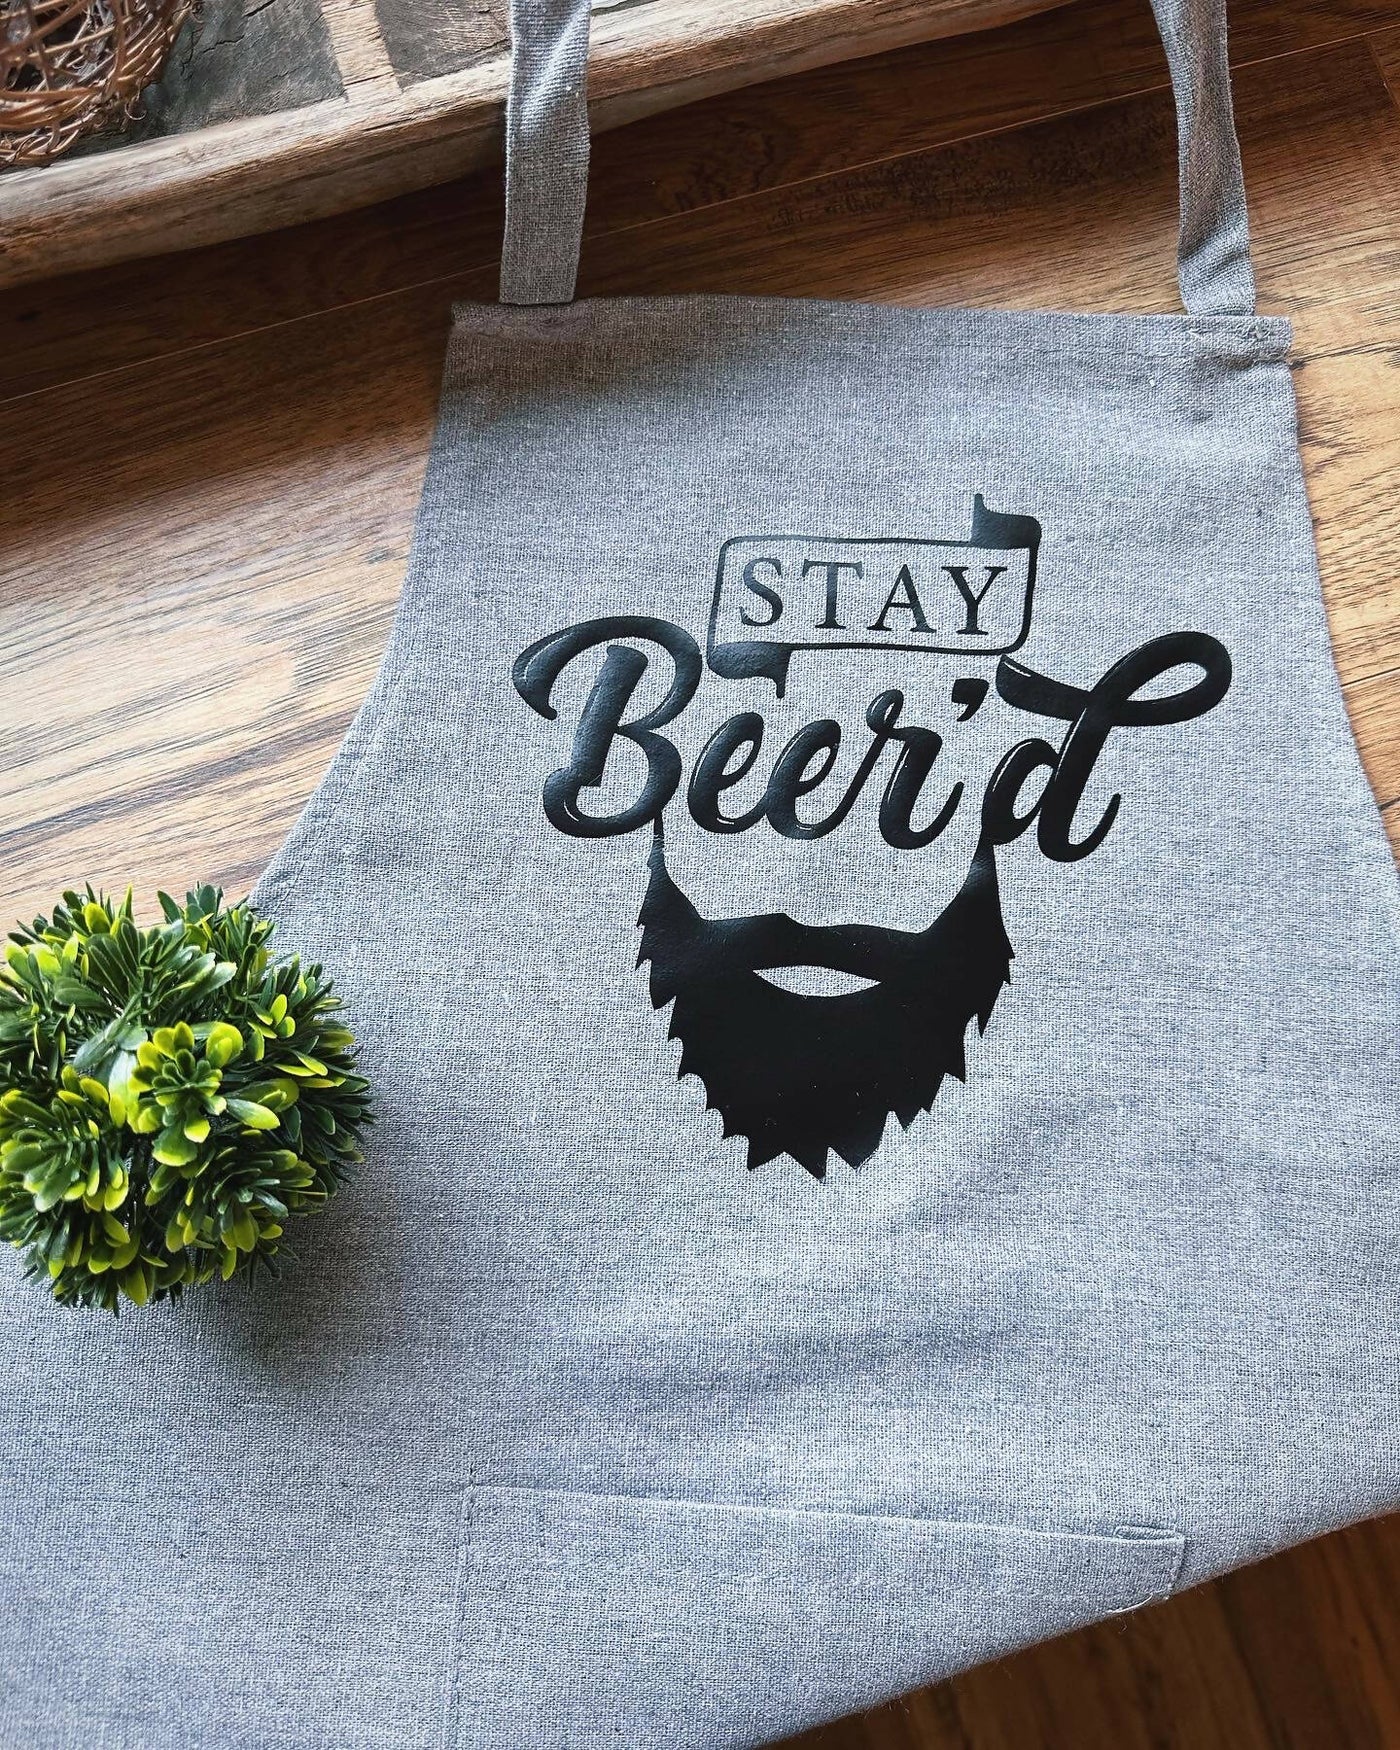 Stay beer’s apron